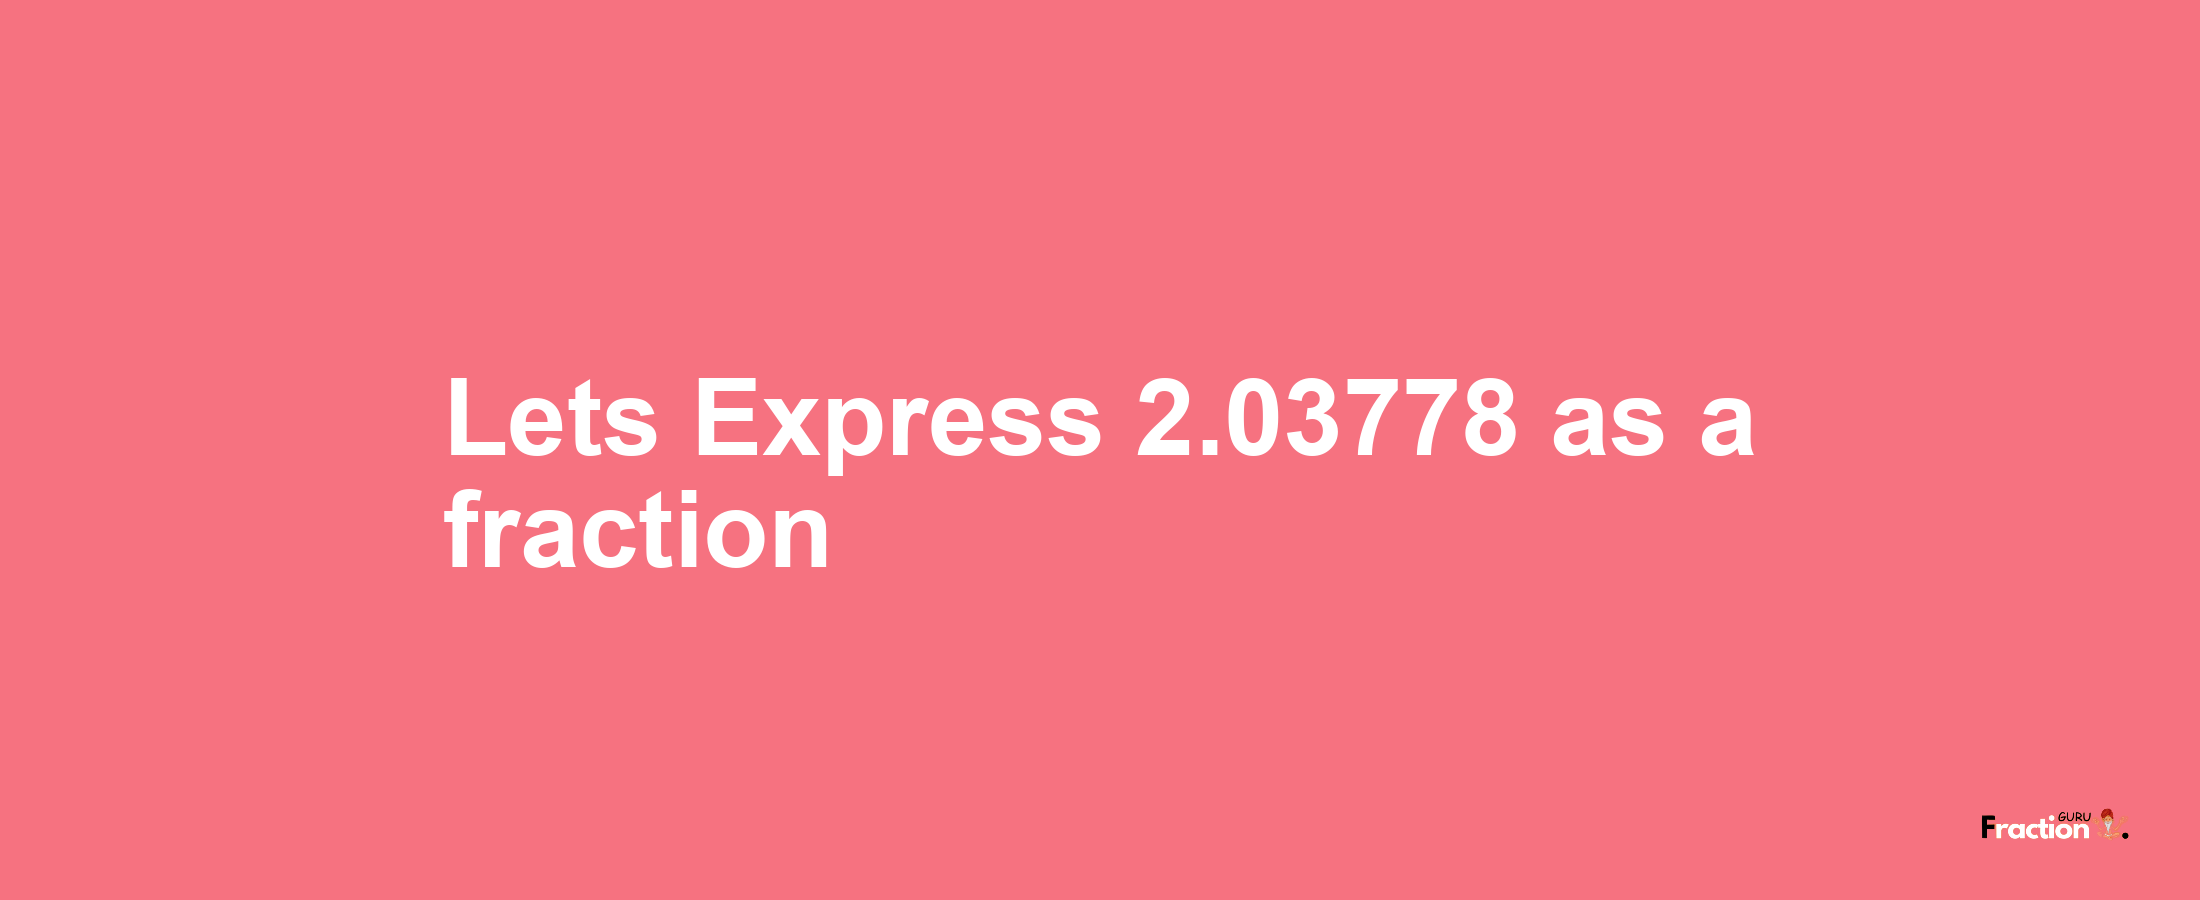 Lets Express 2.03778 as afraction